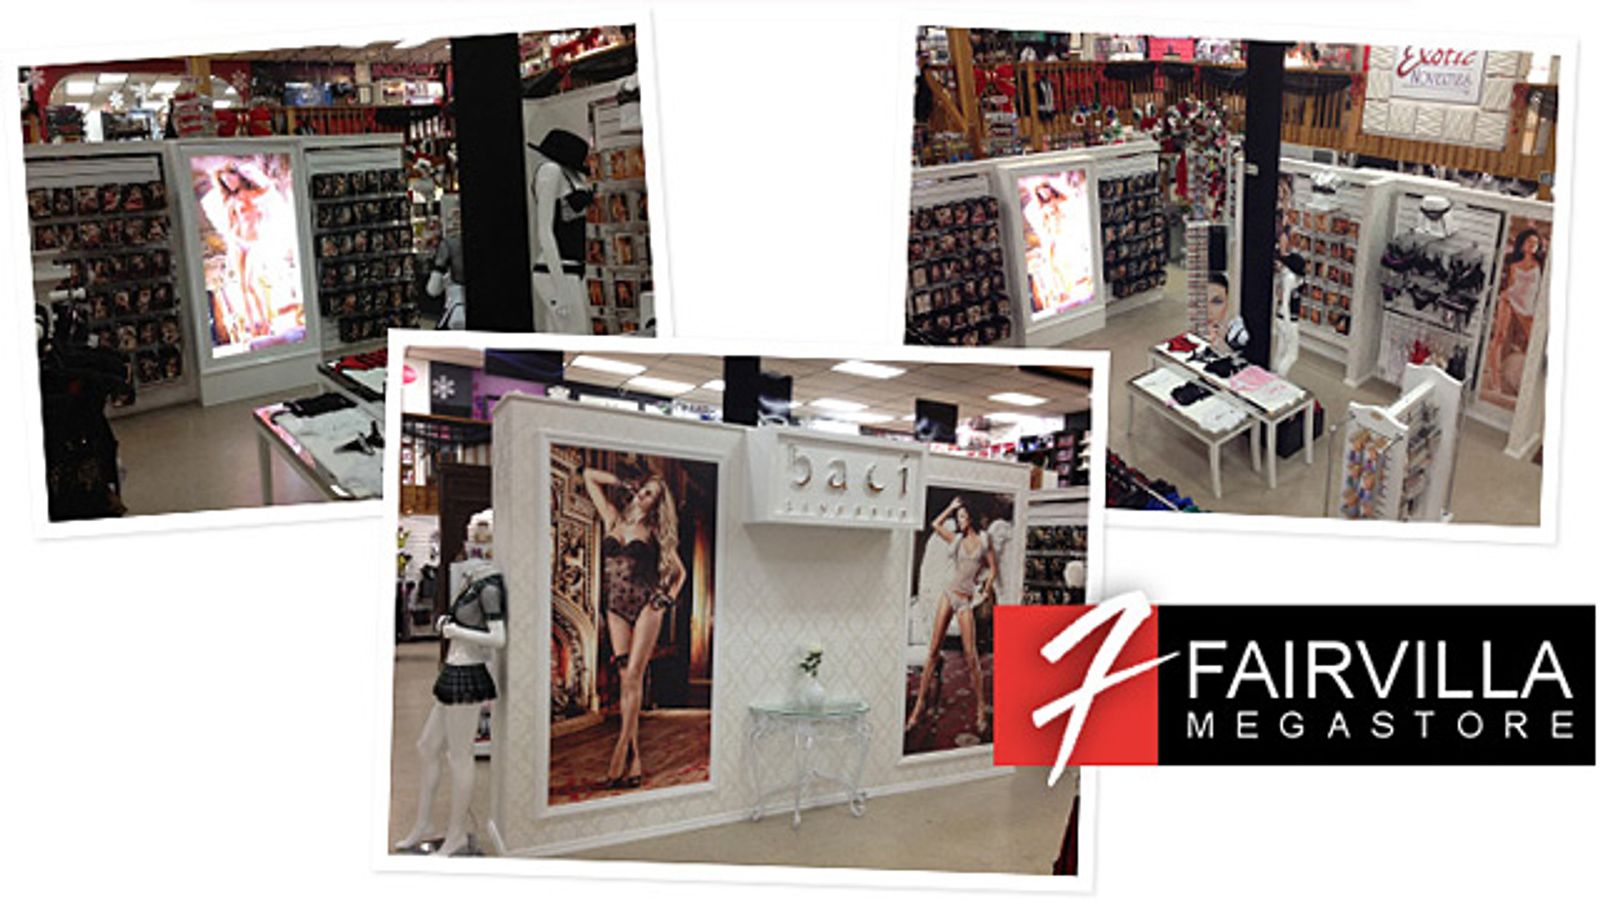 Baci Partners with Fairvilla Megastore in Shop-in-Shop